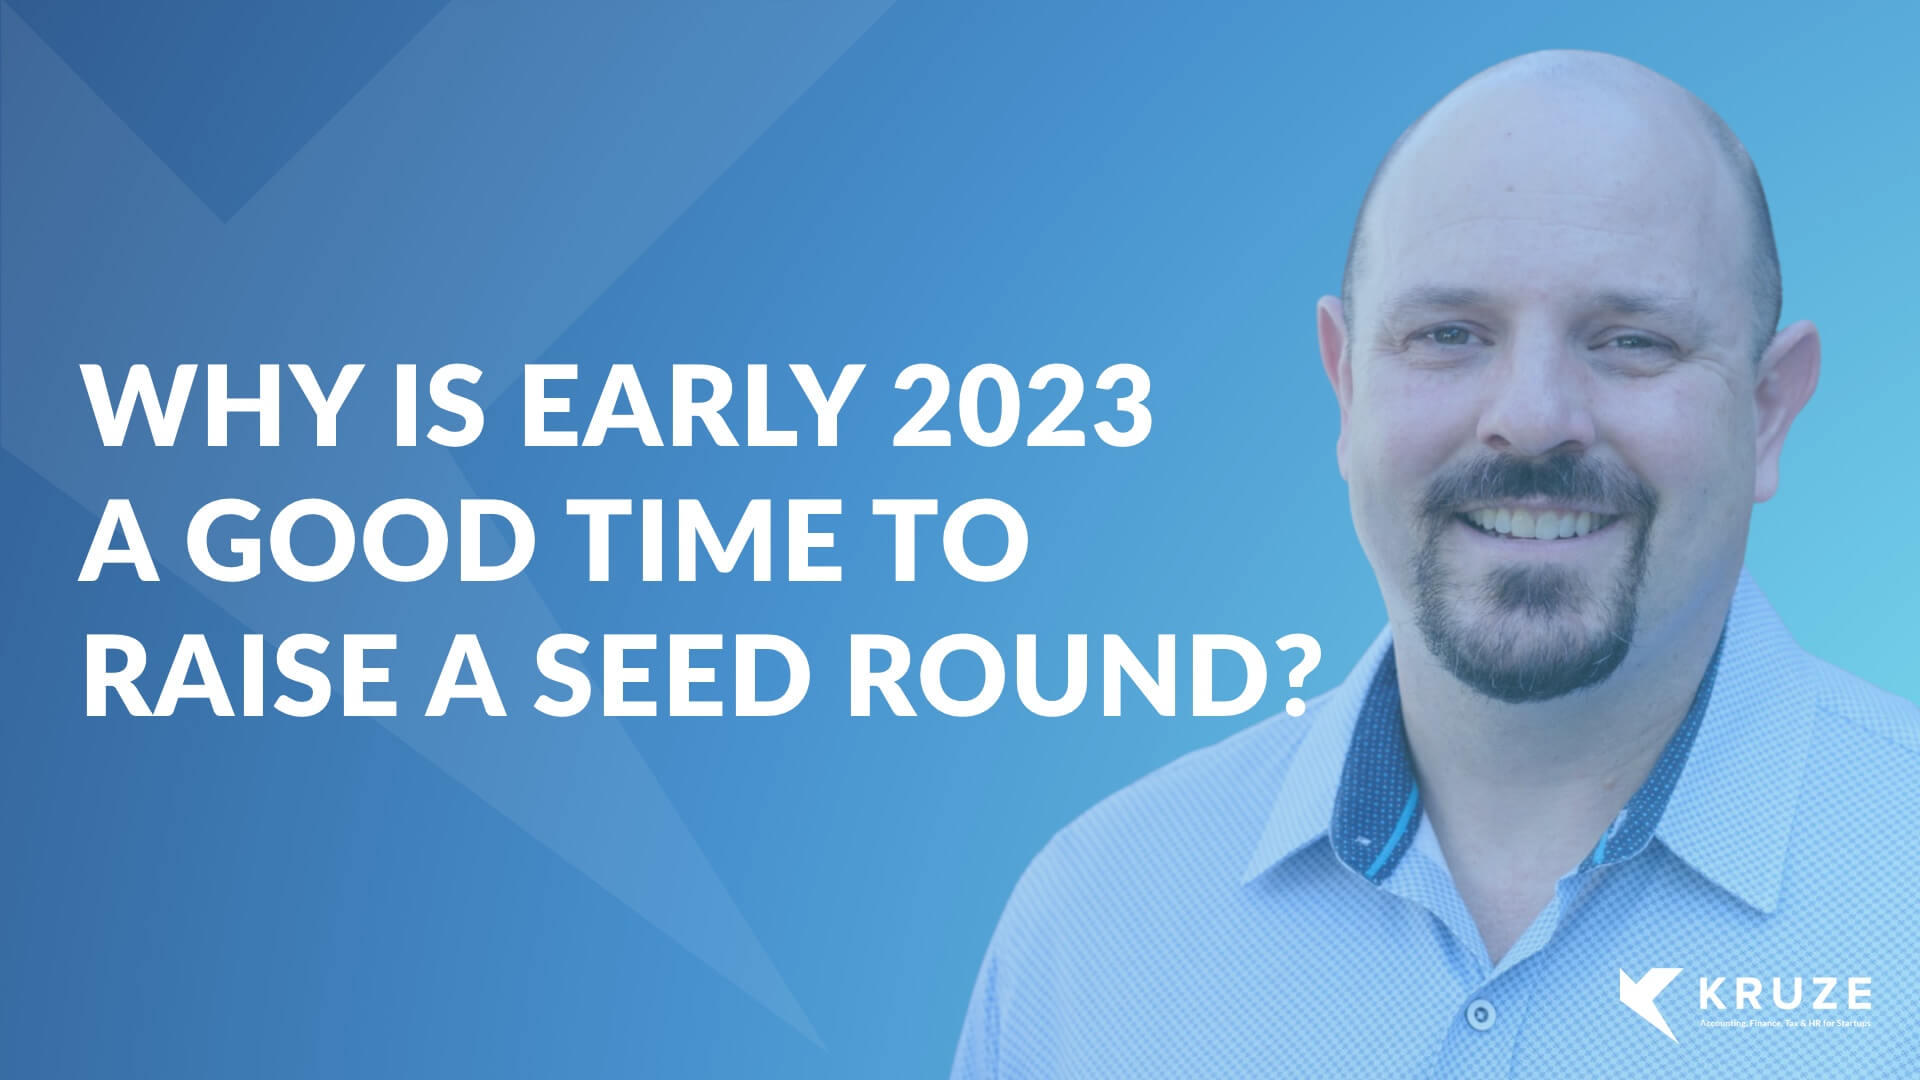 All about pre-seed funding - how, when and how much to raise?